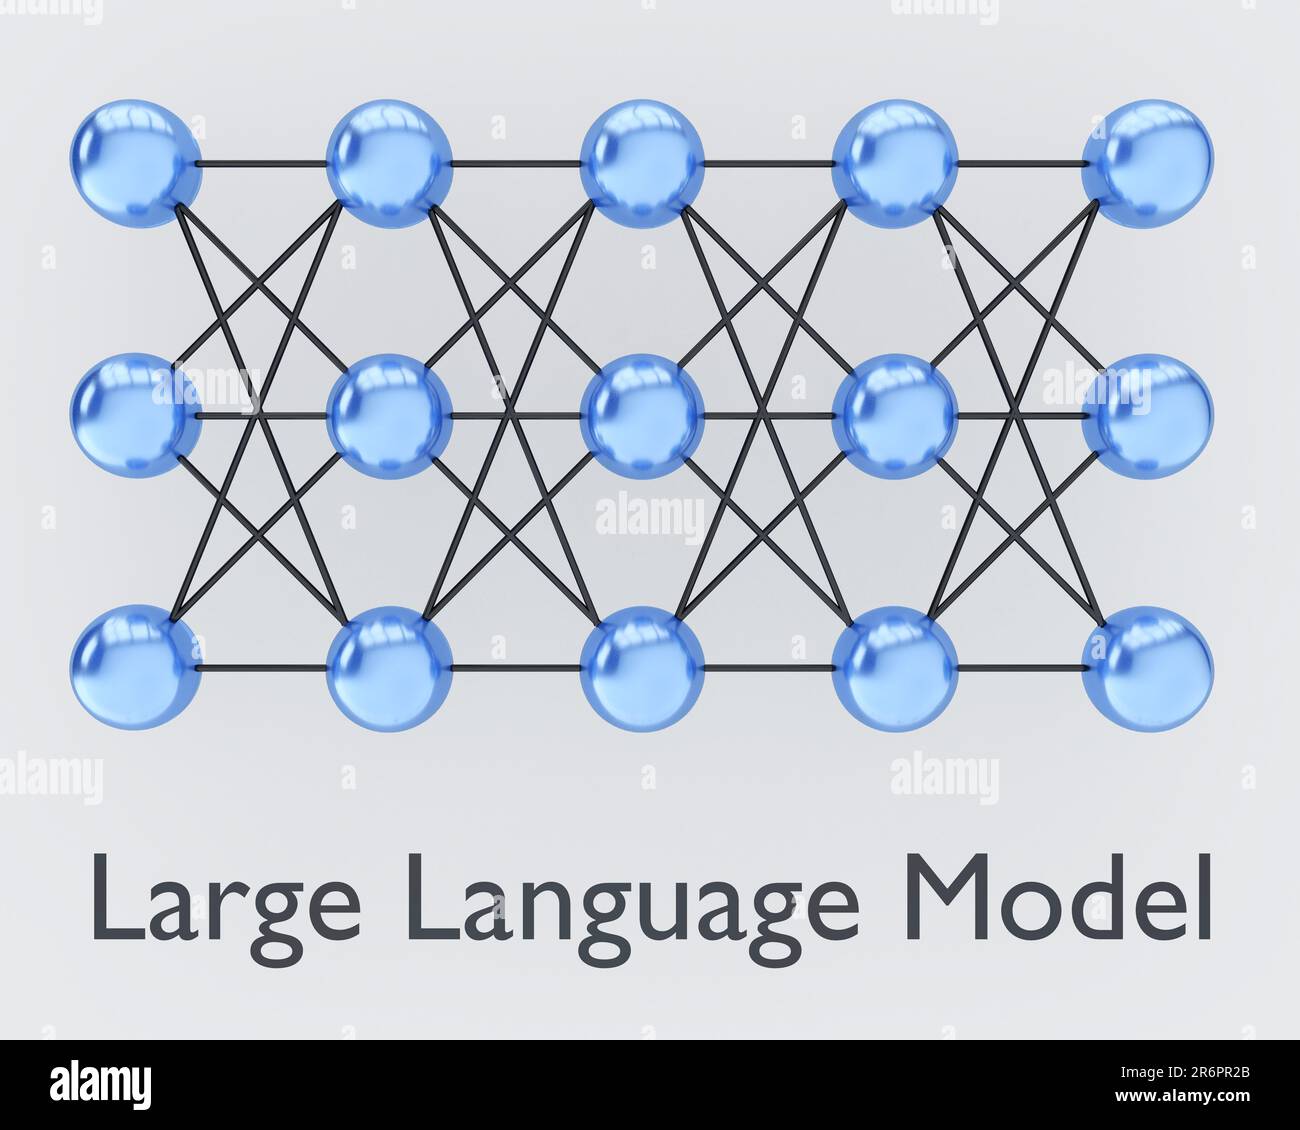 3D illustration of mathematical graph with nodes, titled as Large Language Model. Stock Photo